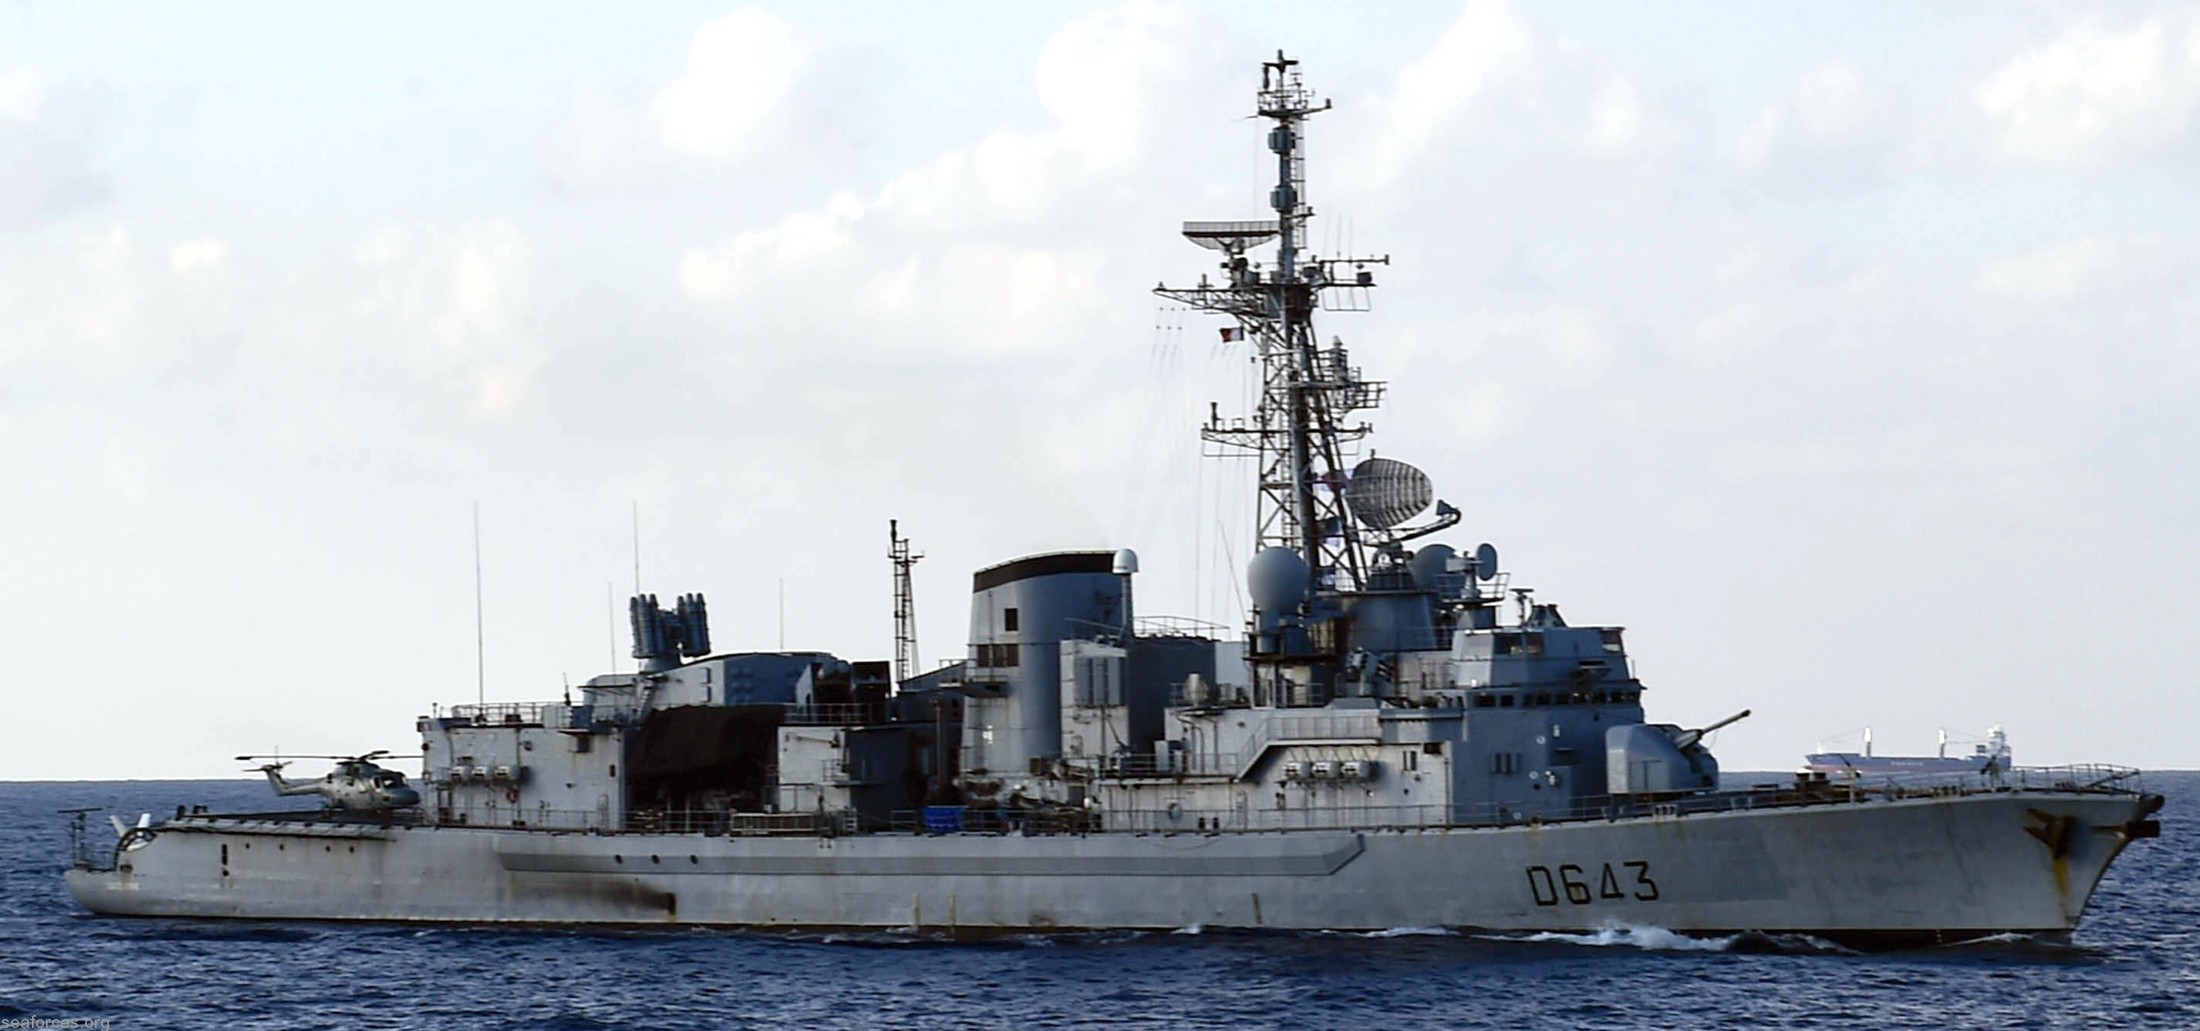 d-643 fs jean de vienne leygues class f70as asw frigate destroyer french navy marine nationale 02